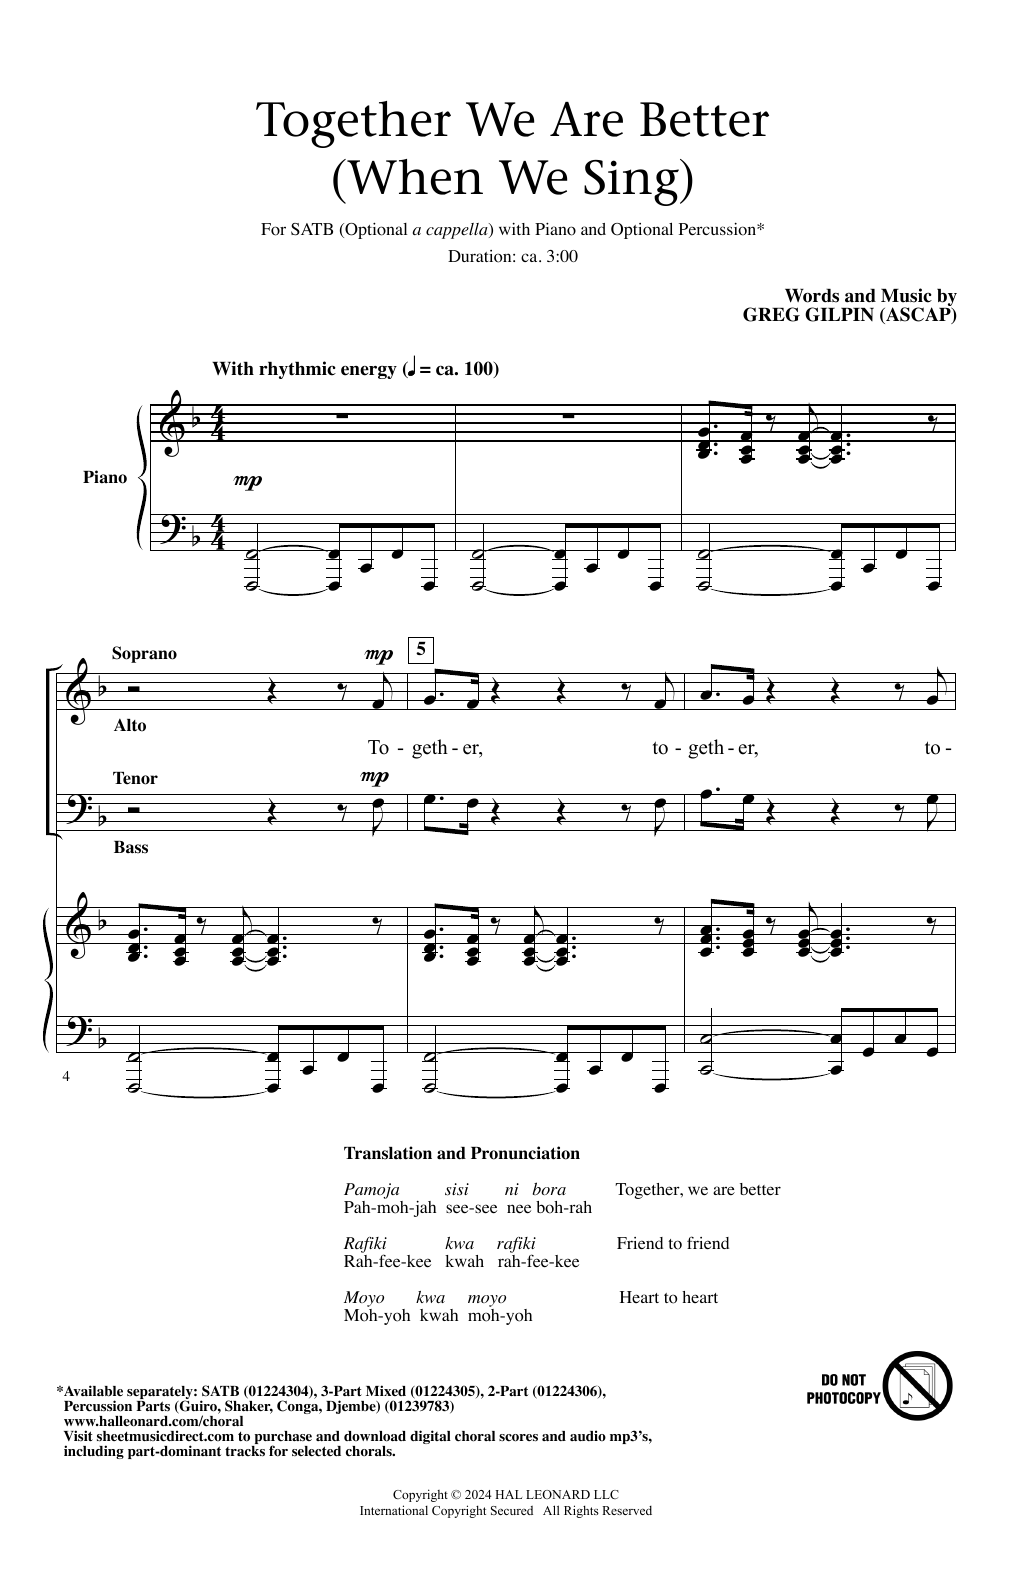 Greg Gilpin Together We Are Better (When We Sing) sheet music notes printable PDF score